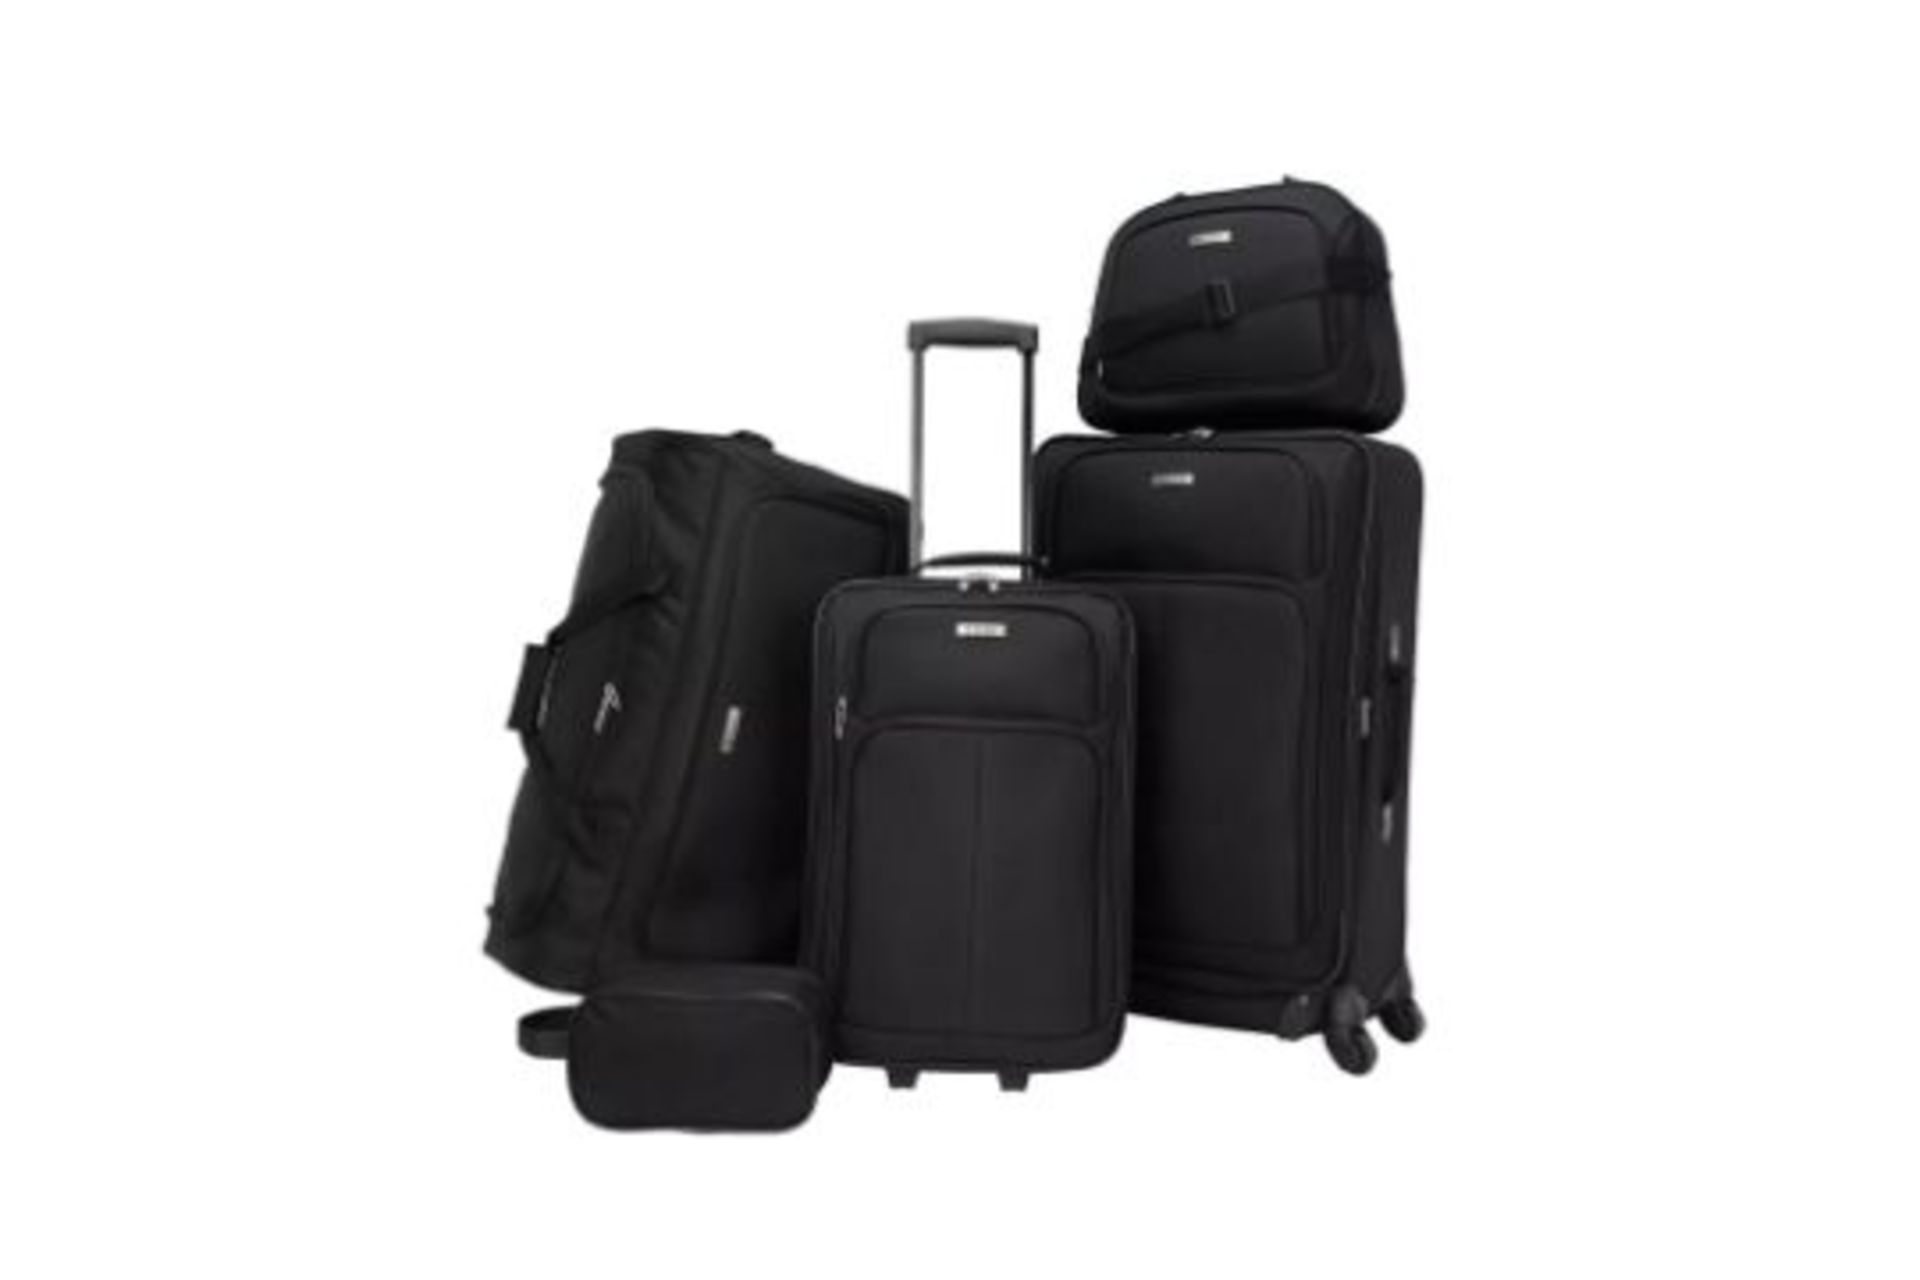 3 X NEW SETS OF TAG Ridgefield Black 5 Piece Softside Luggage Sets. RRP $300 per set, giving this